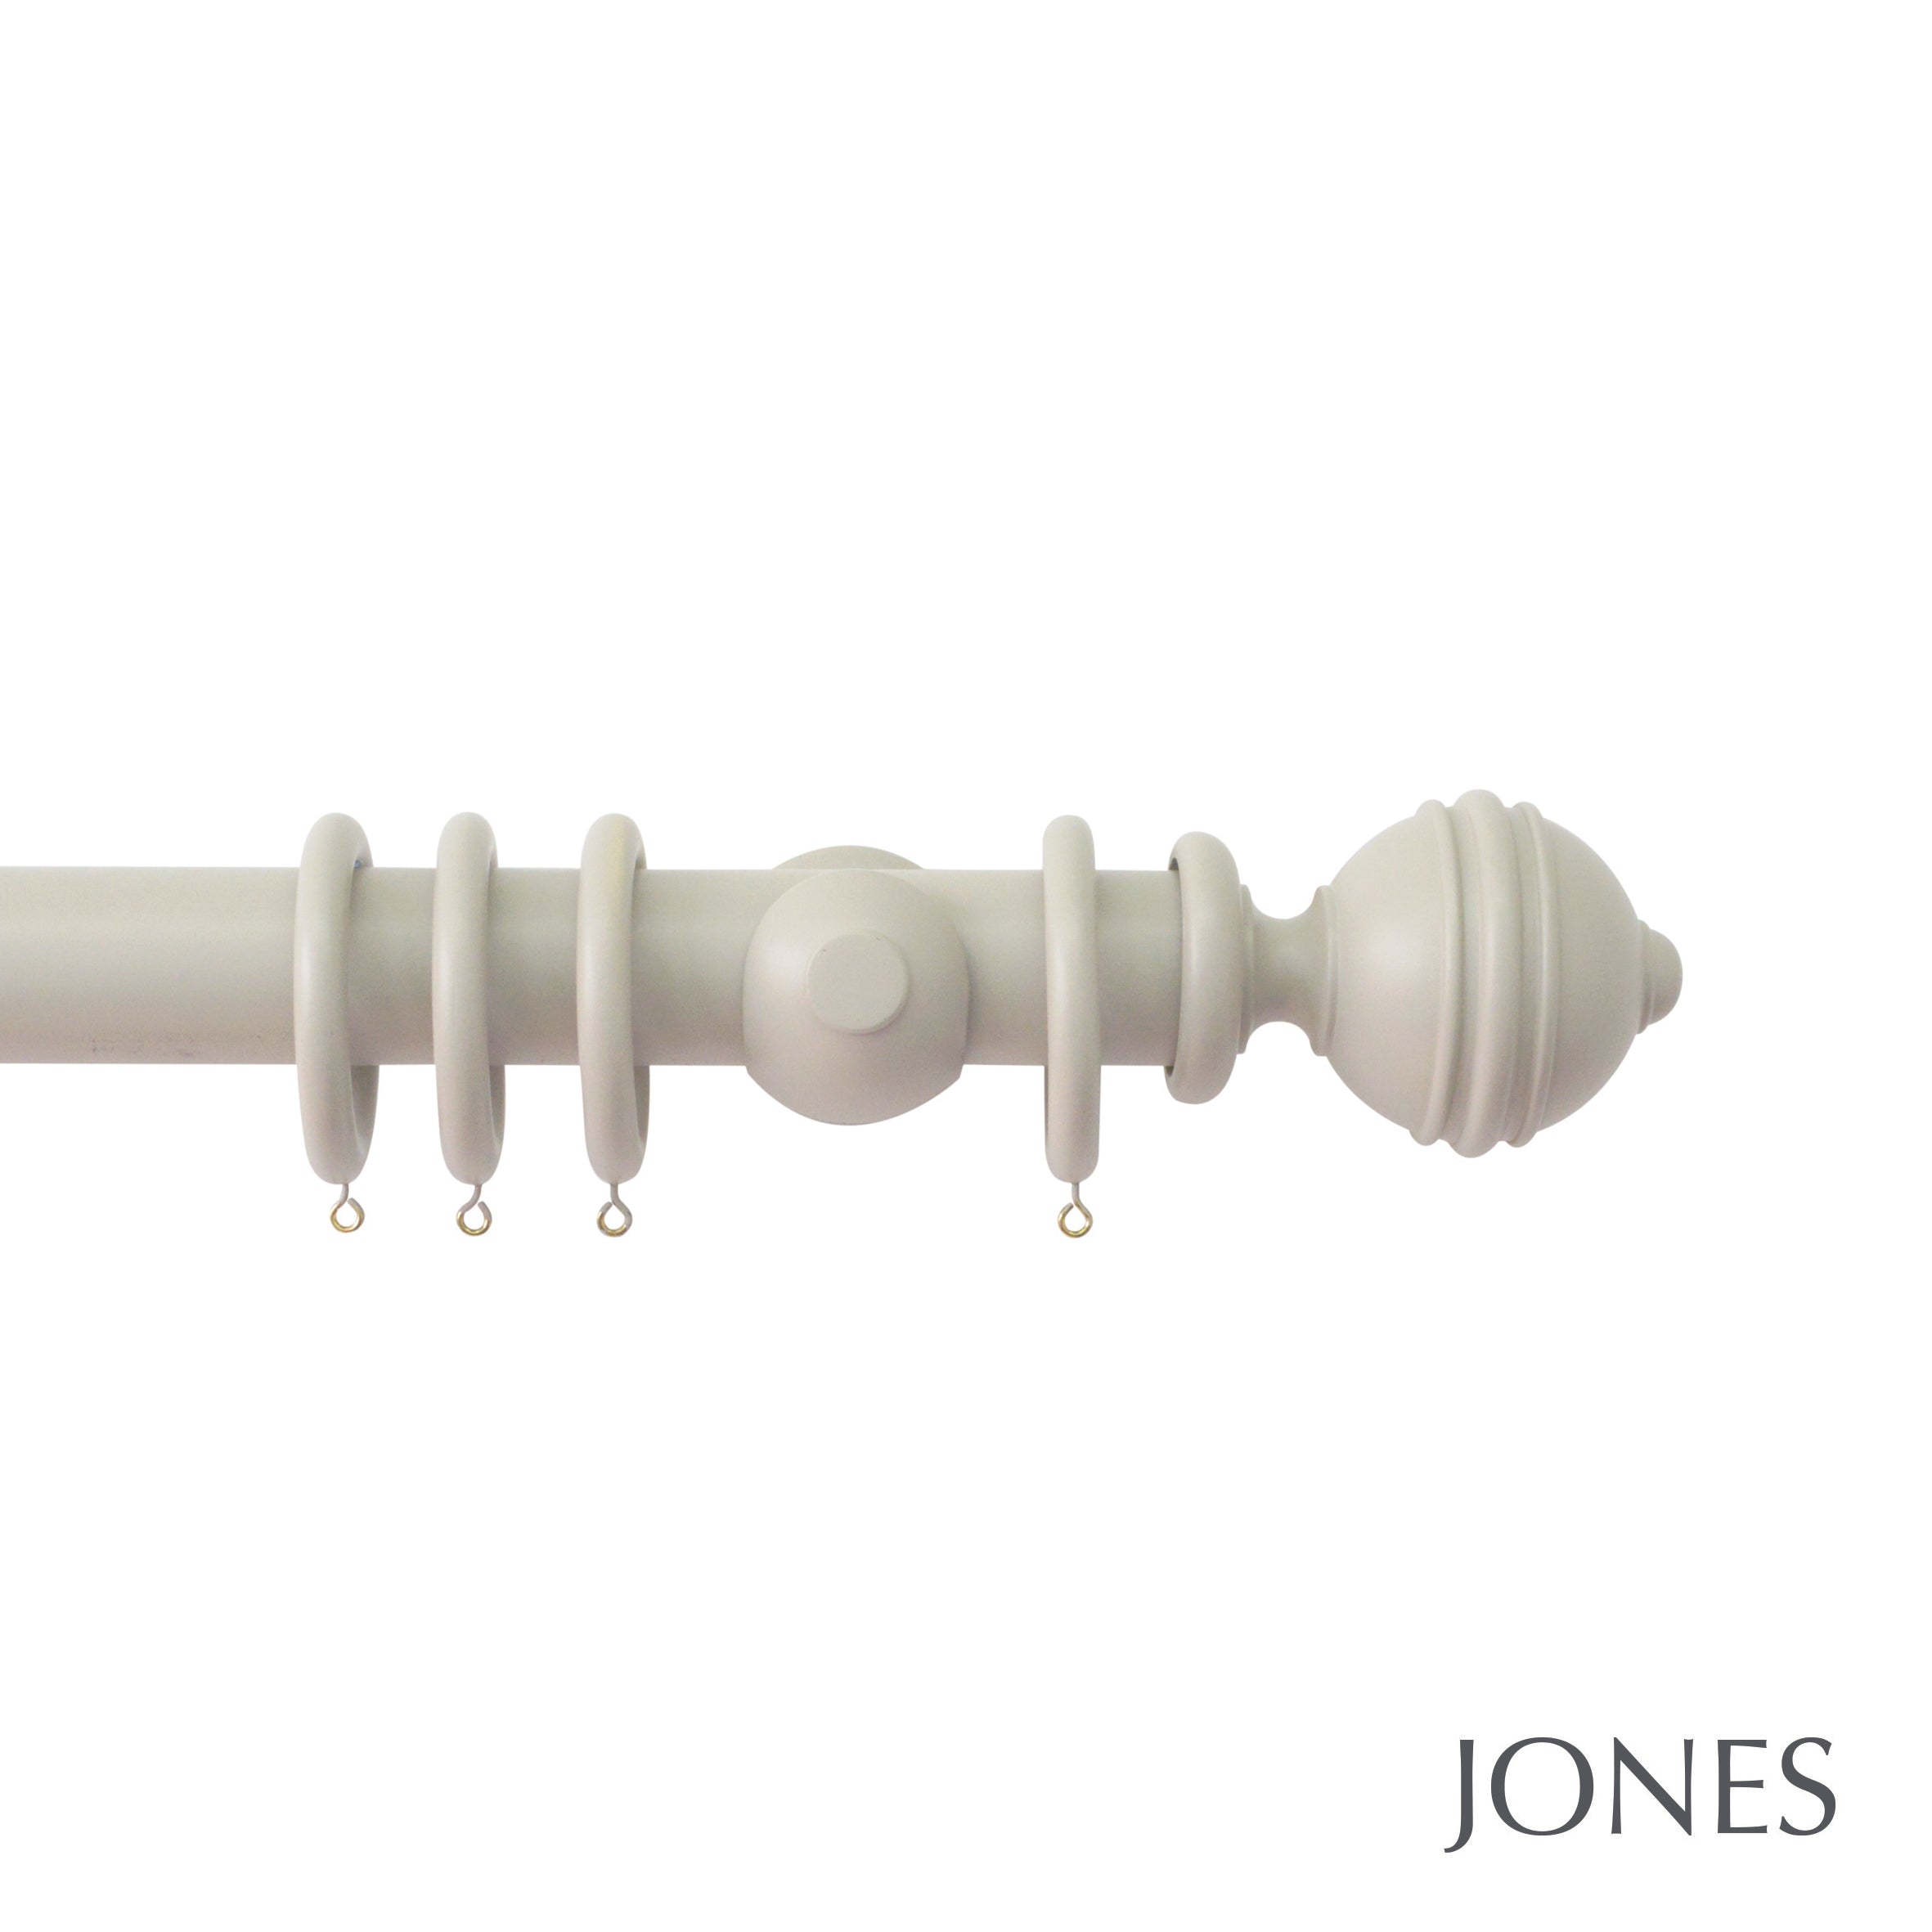 Jones Interiors Estate Ribbed Ball Finial Curtain Pole Set in Clay